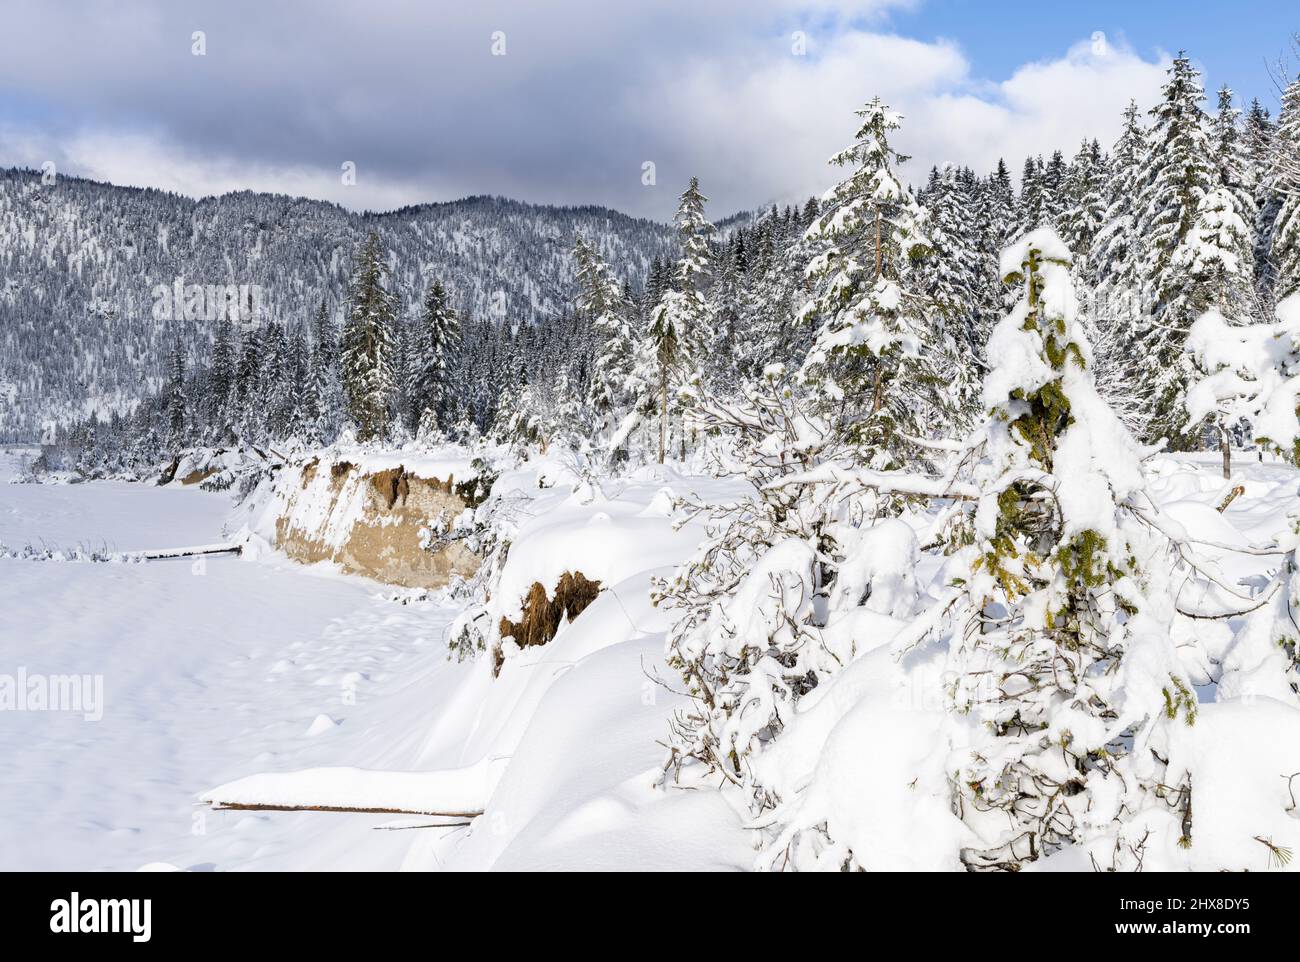 Valley of river Rissbach after heavy snowfall near village Vorderriss during winter. Europe, Germany, Bavaria Stock Photo